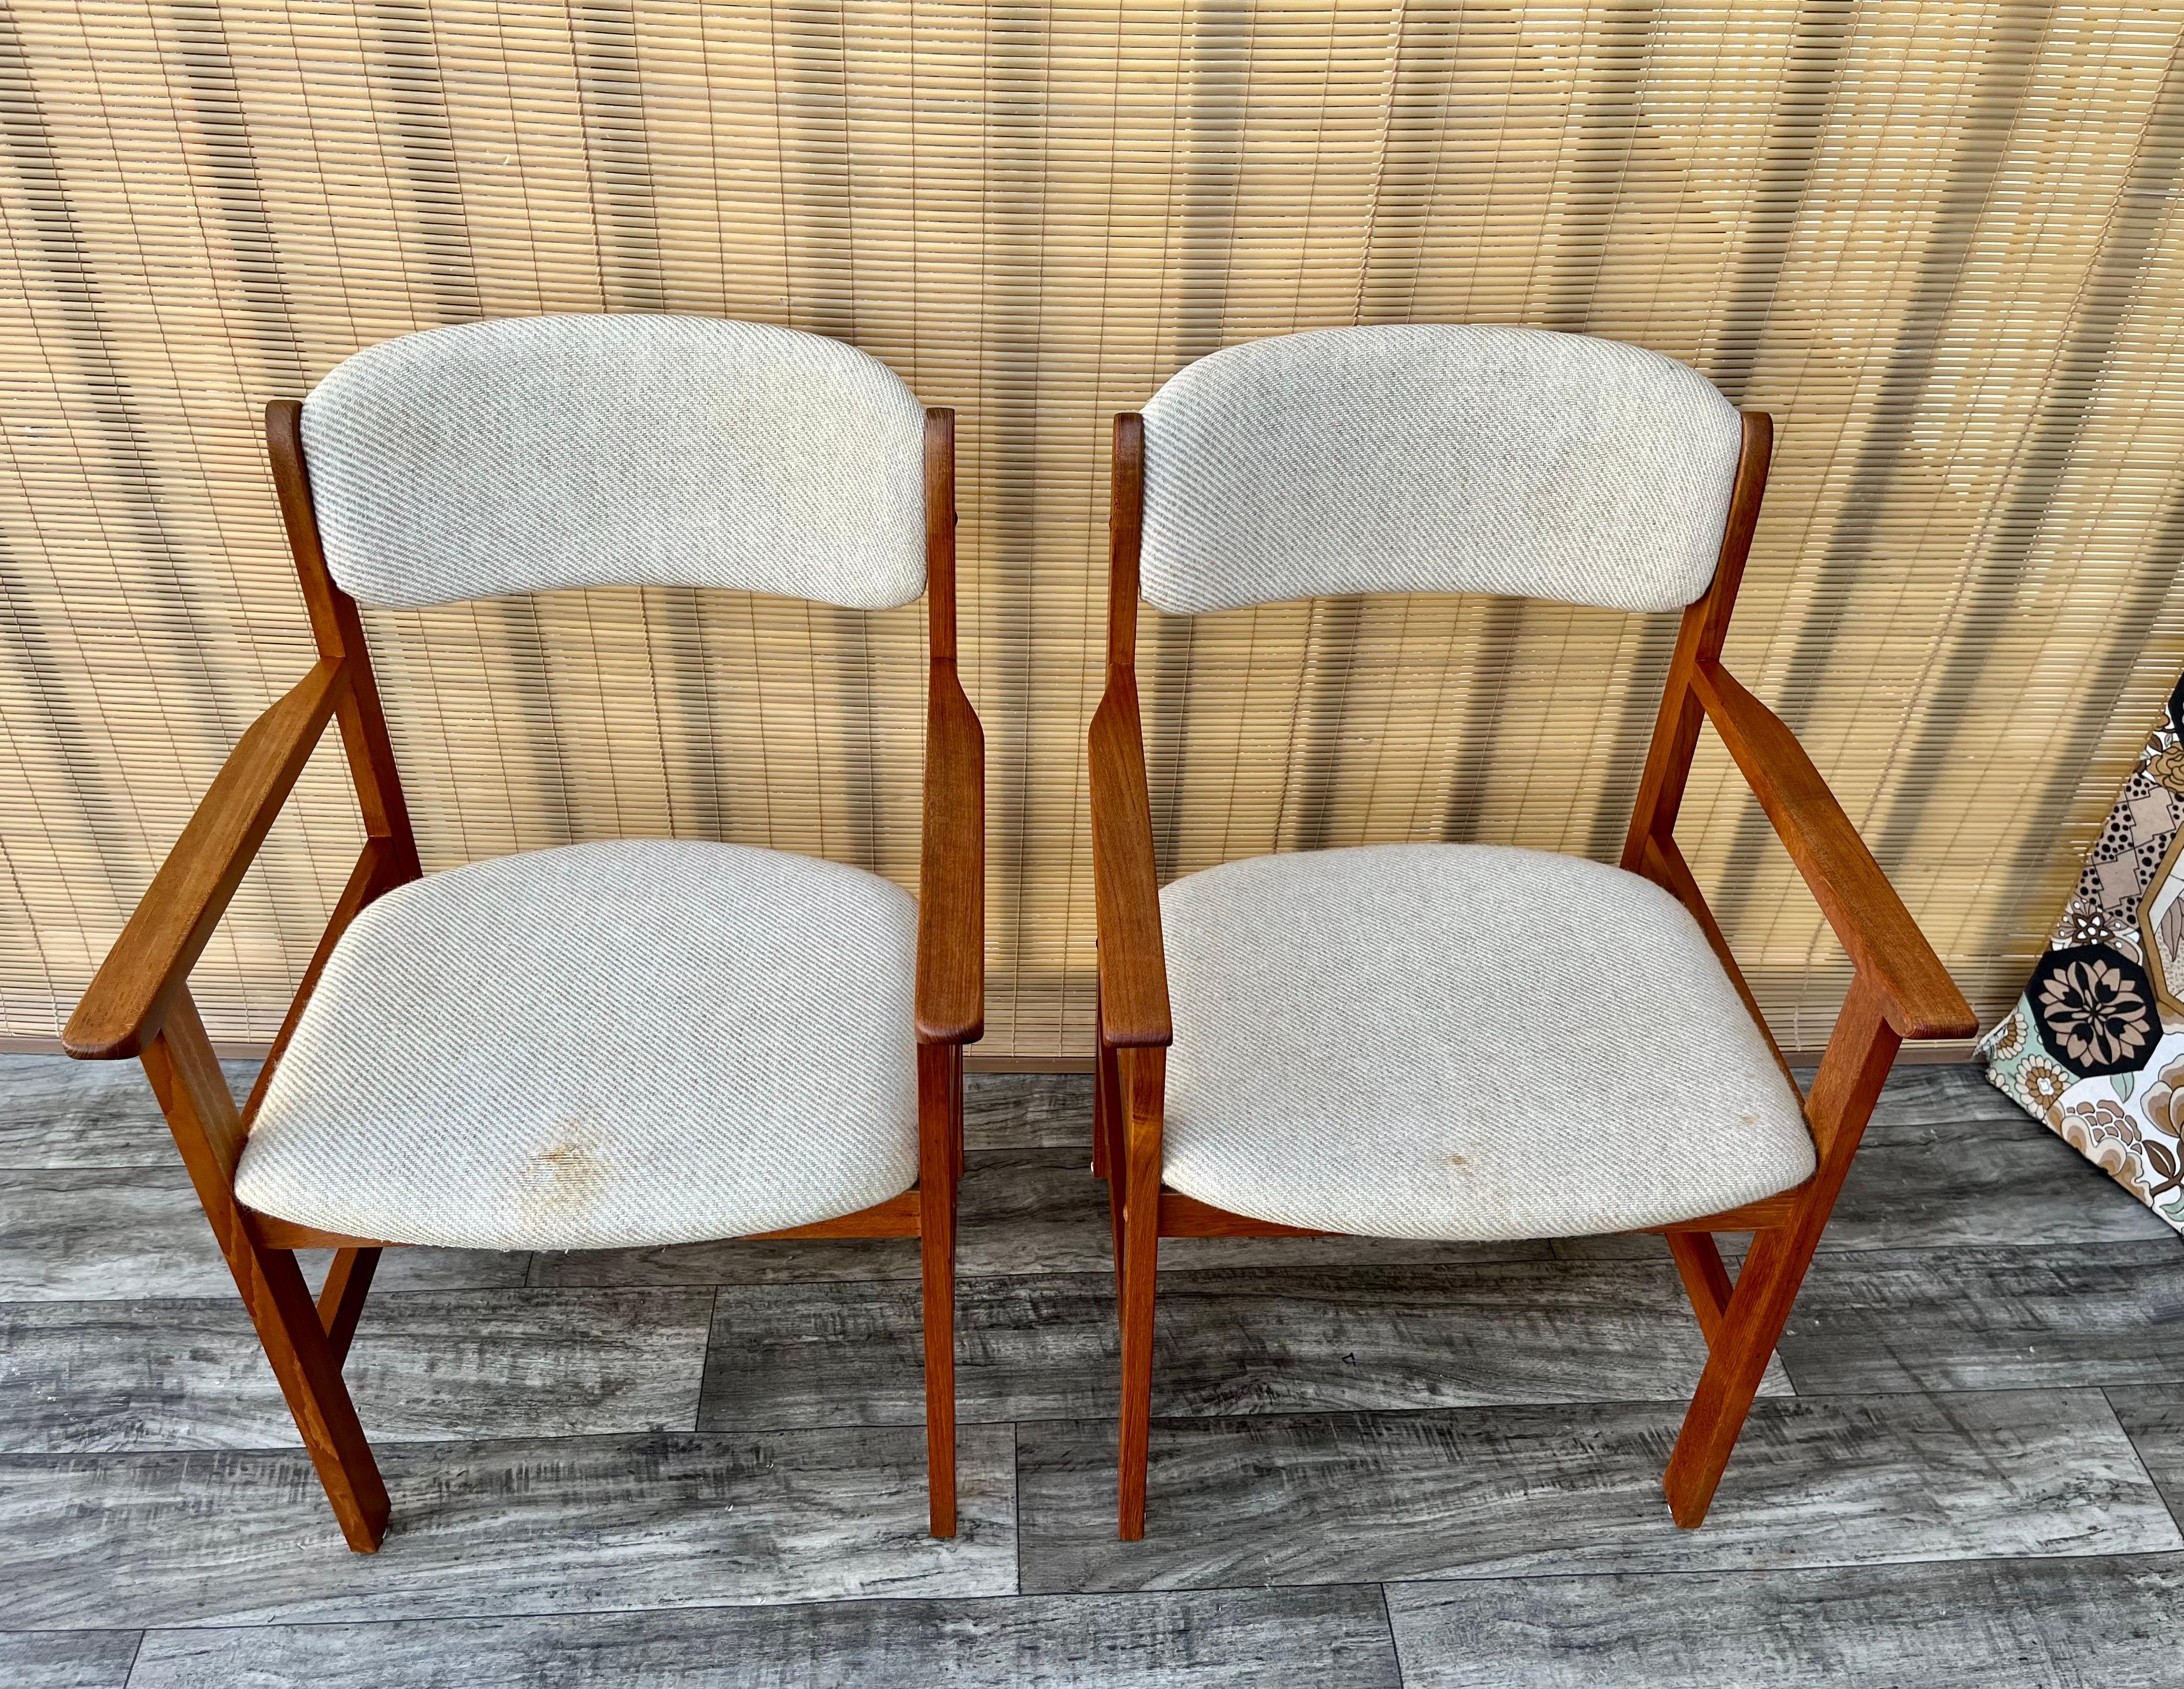 Scandinavian Modern 1980s Mid-Century Danish Modern Style Captain Chairs by Benny Linden Design. For Sale